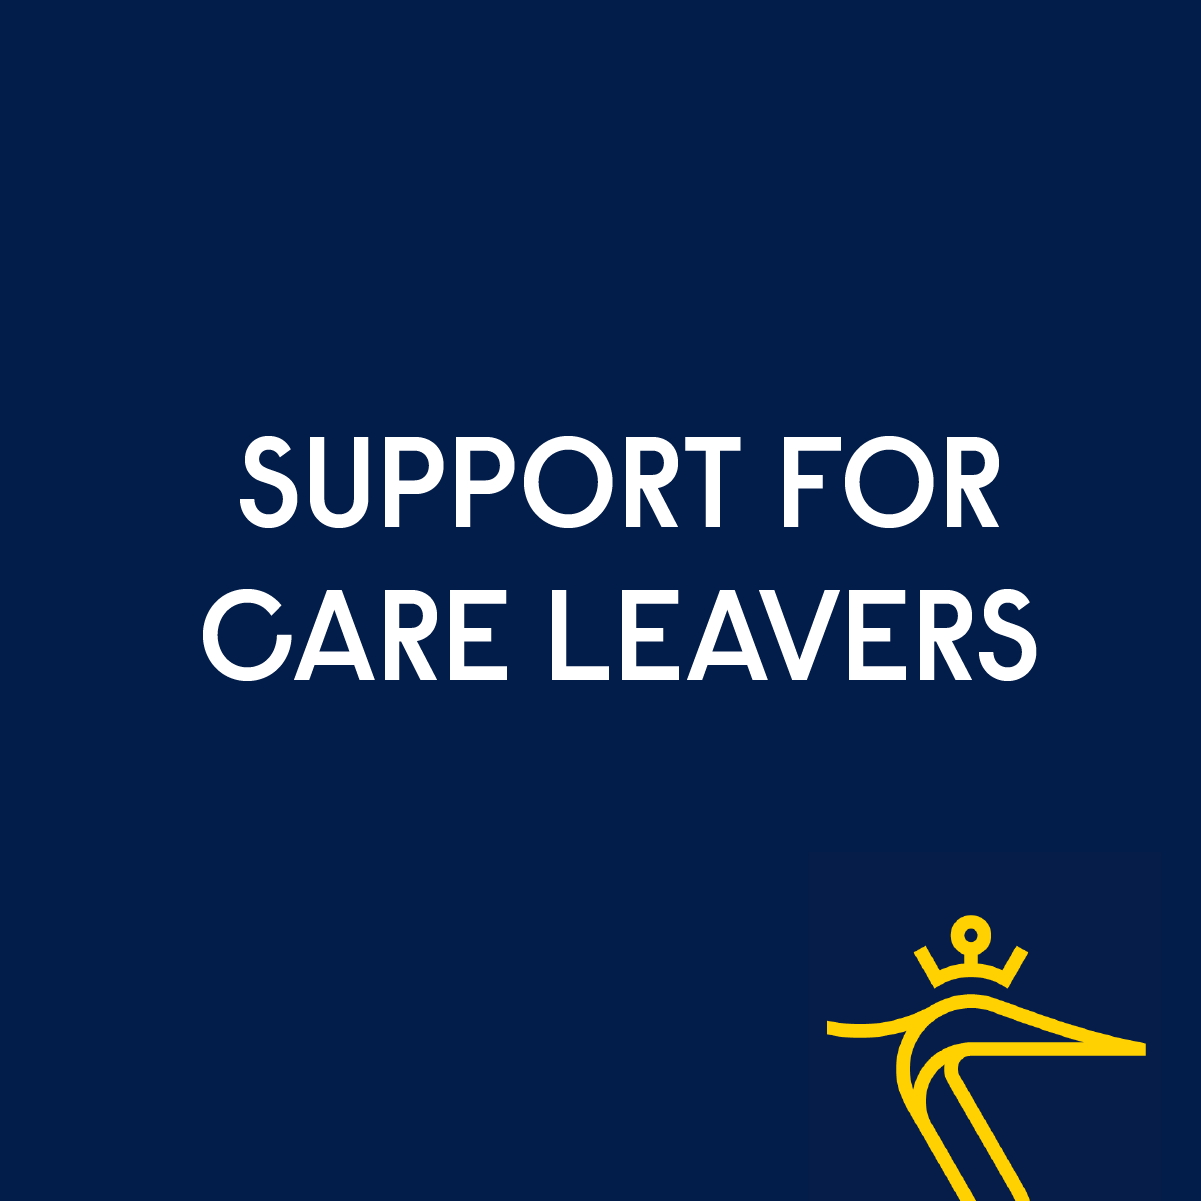 ?Support for Care Leavers